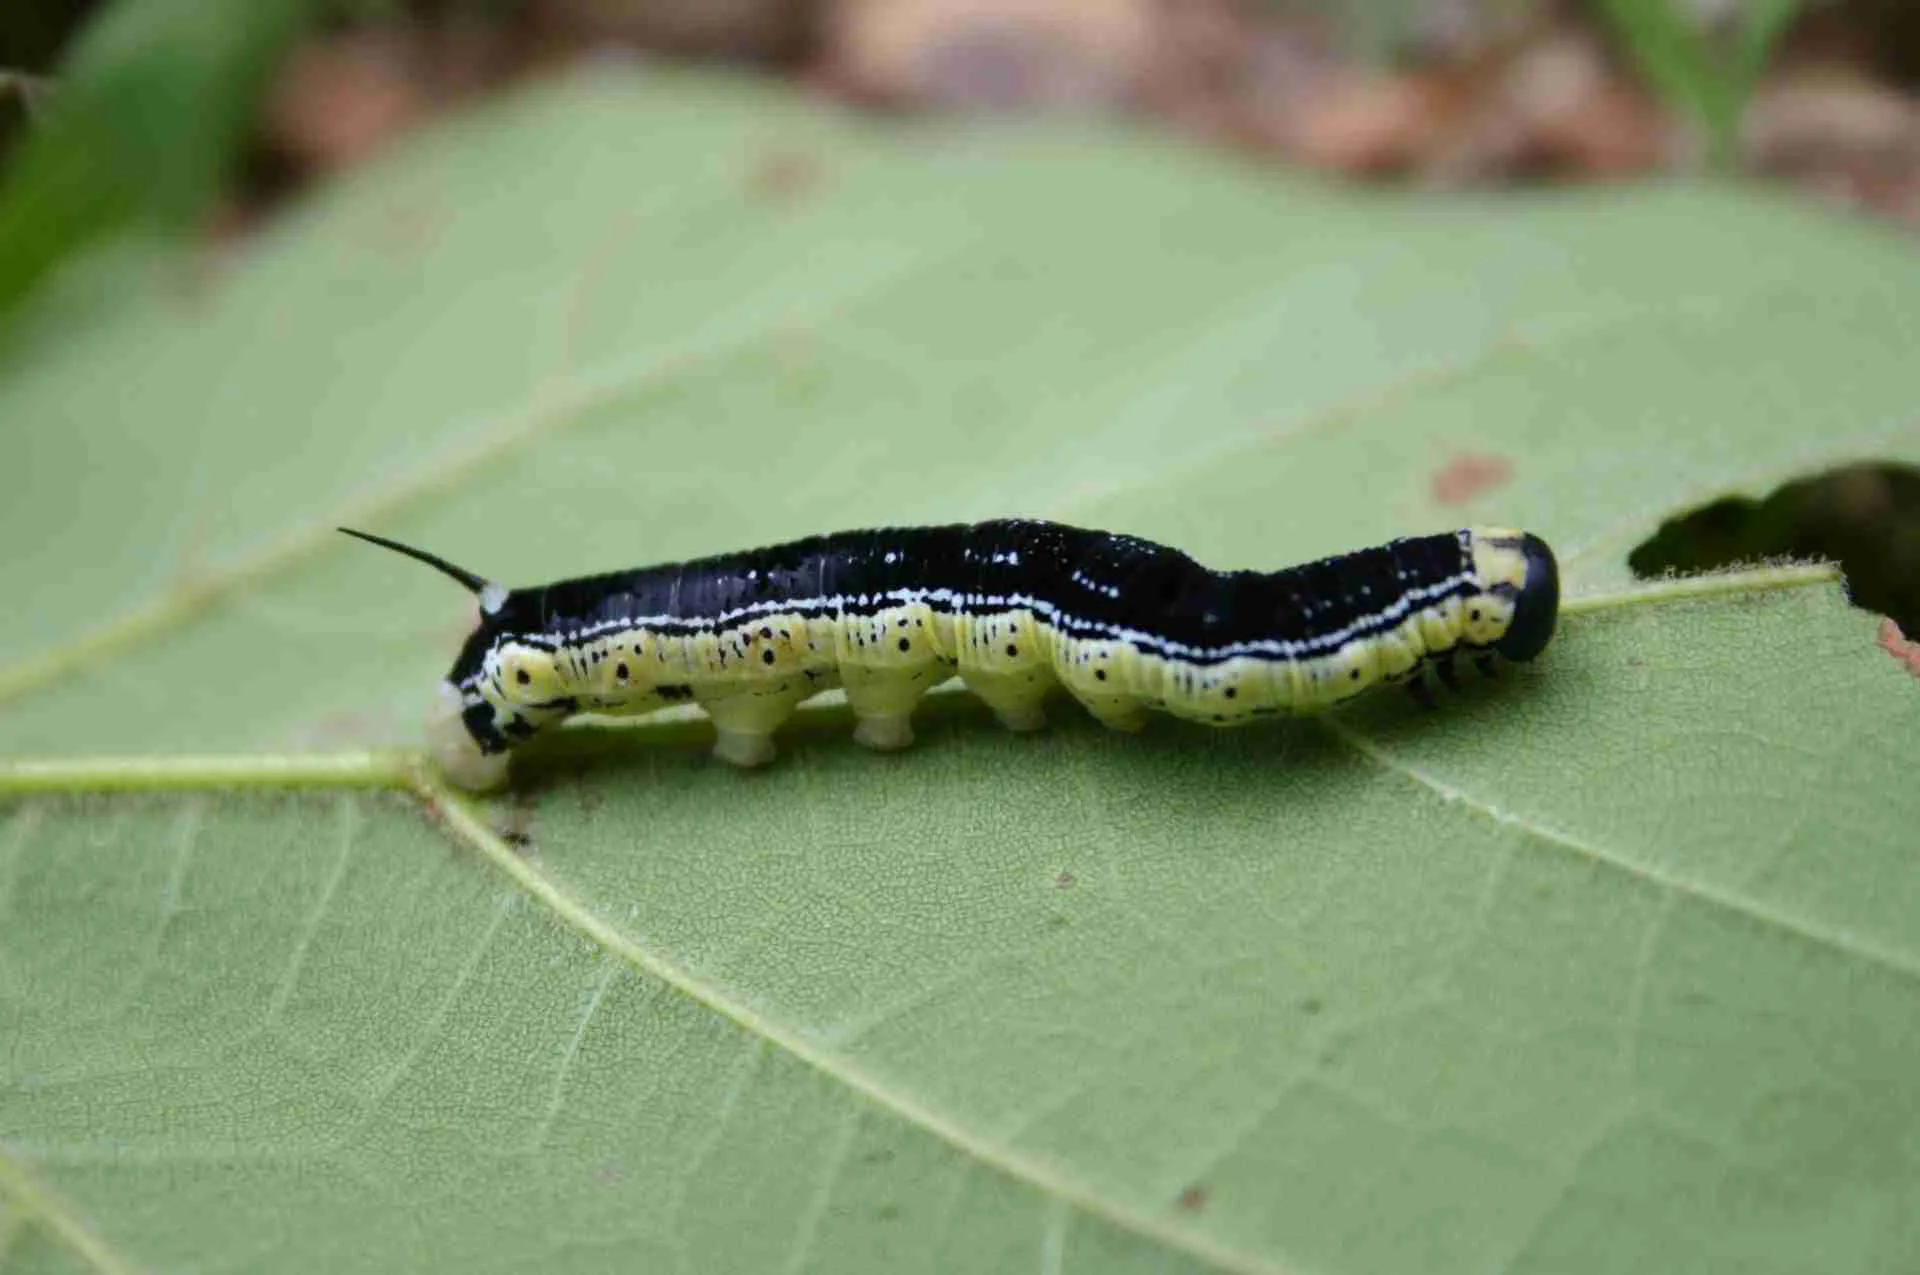 Insects as bait for Fishing: Caterpillars